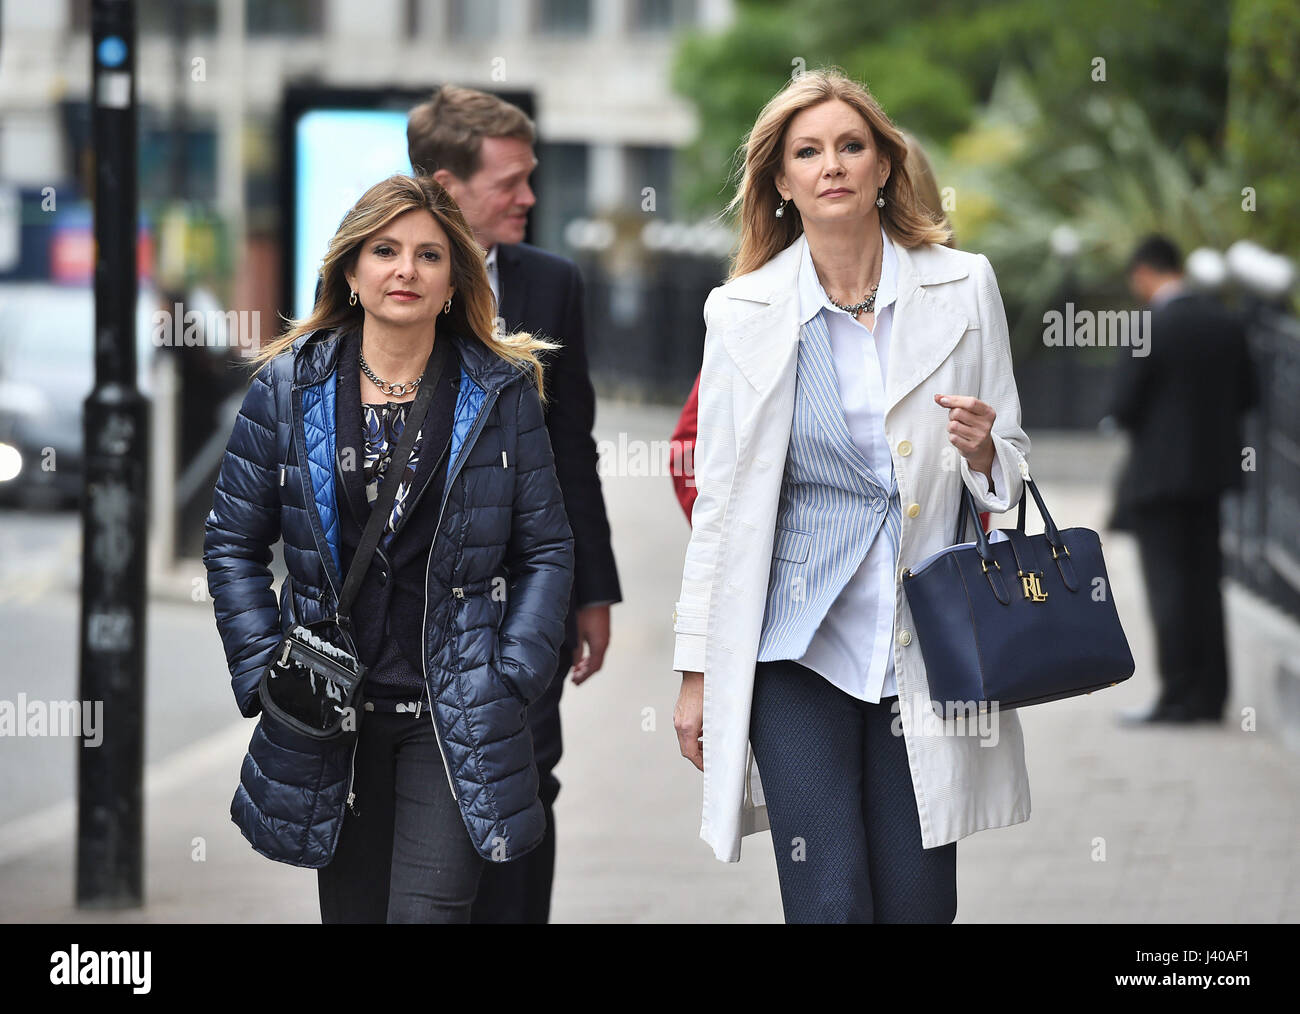 Lisa Bloom (left) with Dr. Wendy Walsh arriving at Ofcom in London, to issue a warning over Rupert Murdoch's bid for Sky. Stock Photo